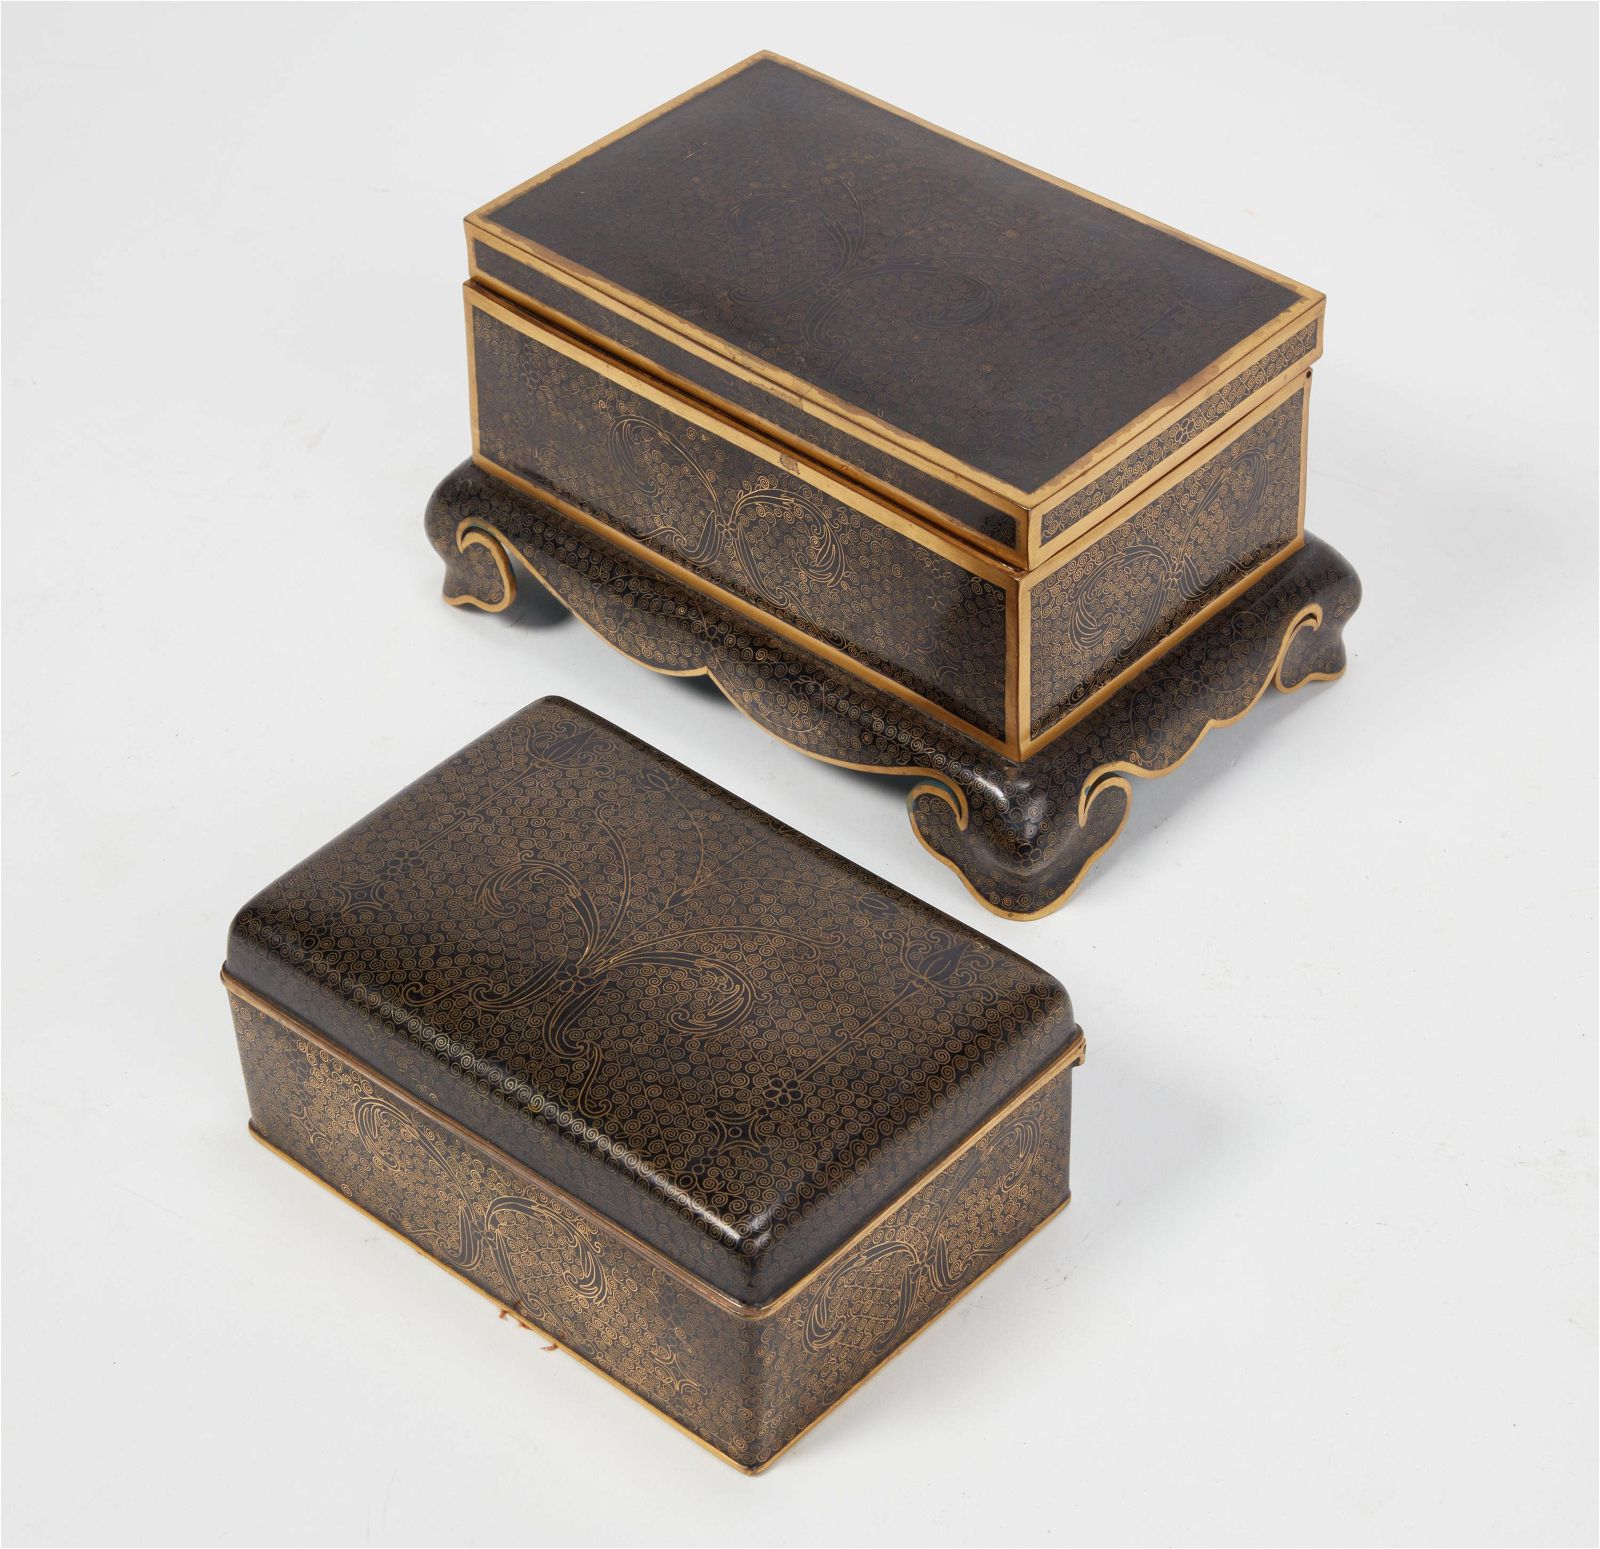 TWO JAPANESE BLACK LACQUER BOXESTwo